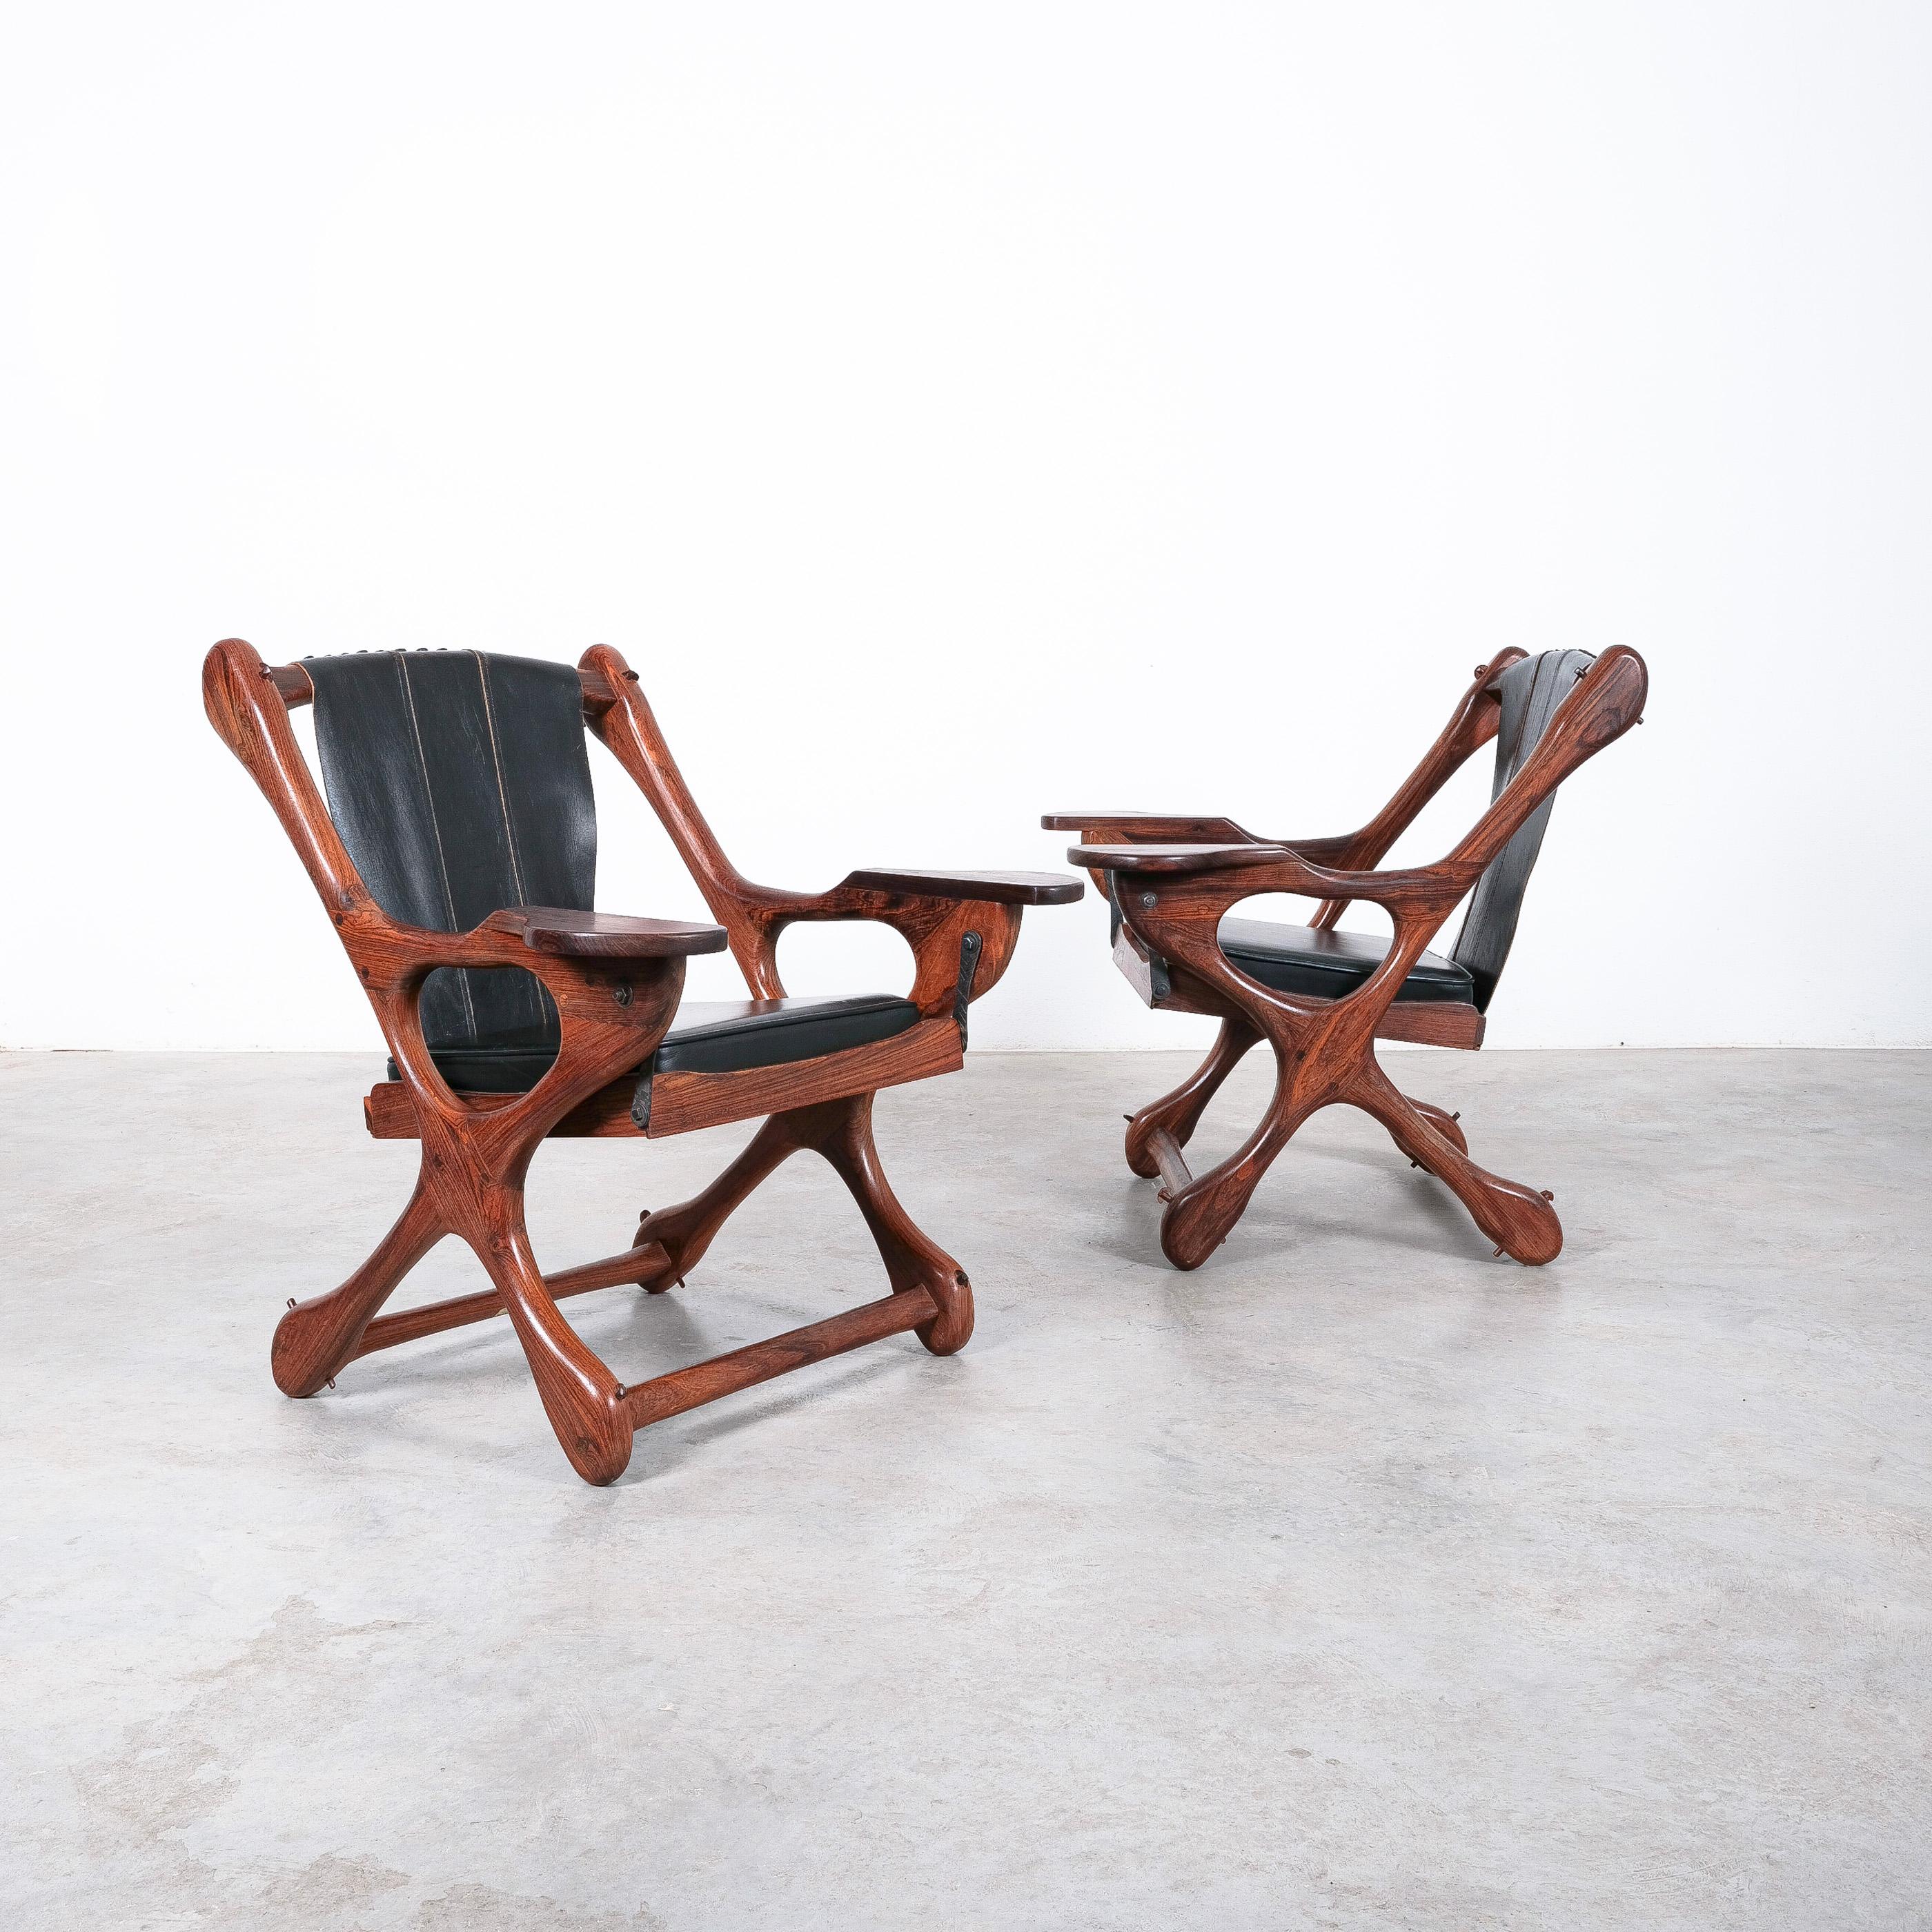 Rare pair of rosewood and leather chairs in wonderful condition, Don Shoemaker 1960

A stunning pair of vintage safari chairs in solid rosewood and leather. US born Don Shoemaker has created a sculptural masterpiece with the 'Swinger Chair' for